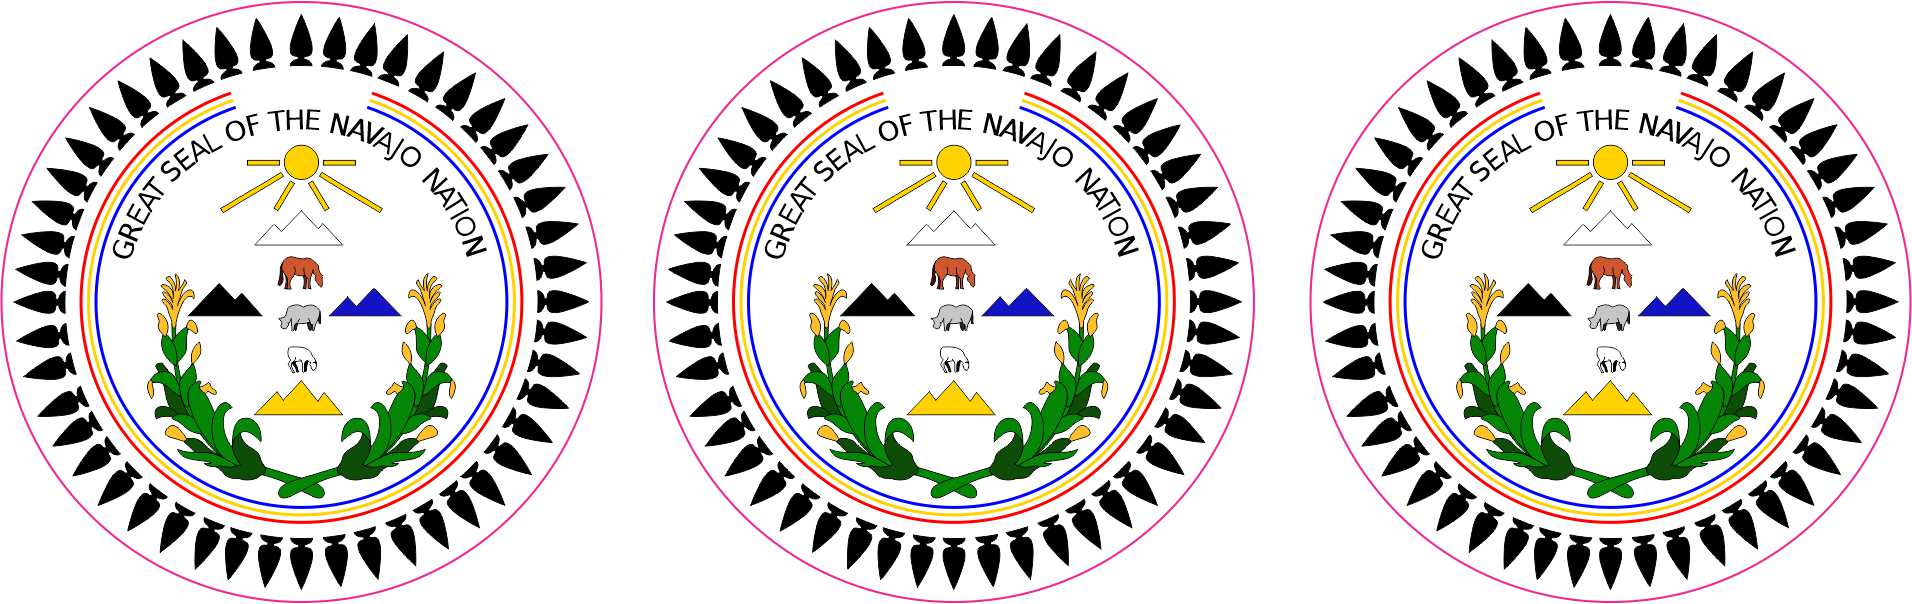 2in x 2in Great Seal of the Navajo Nation Vinyl Stickers Car Vehicle Decal